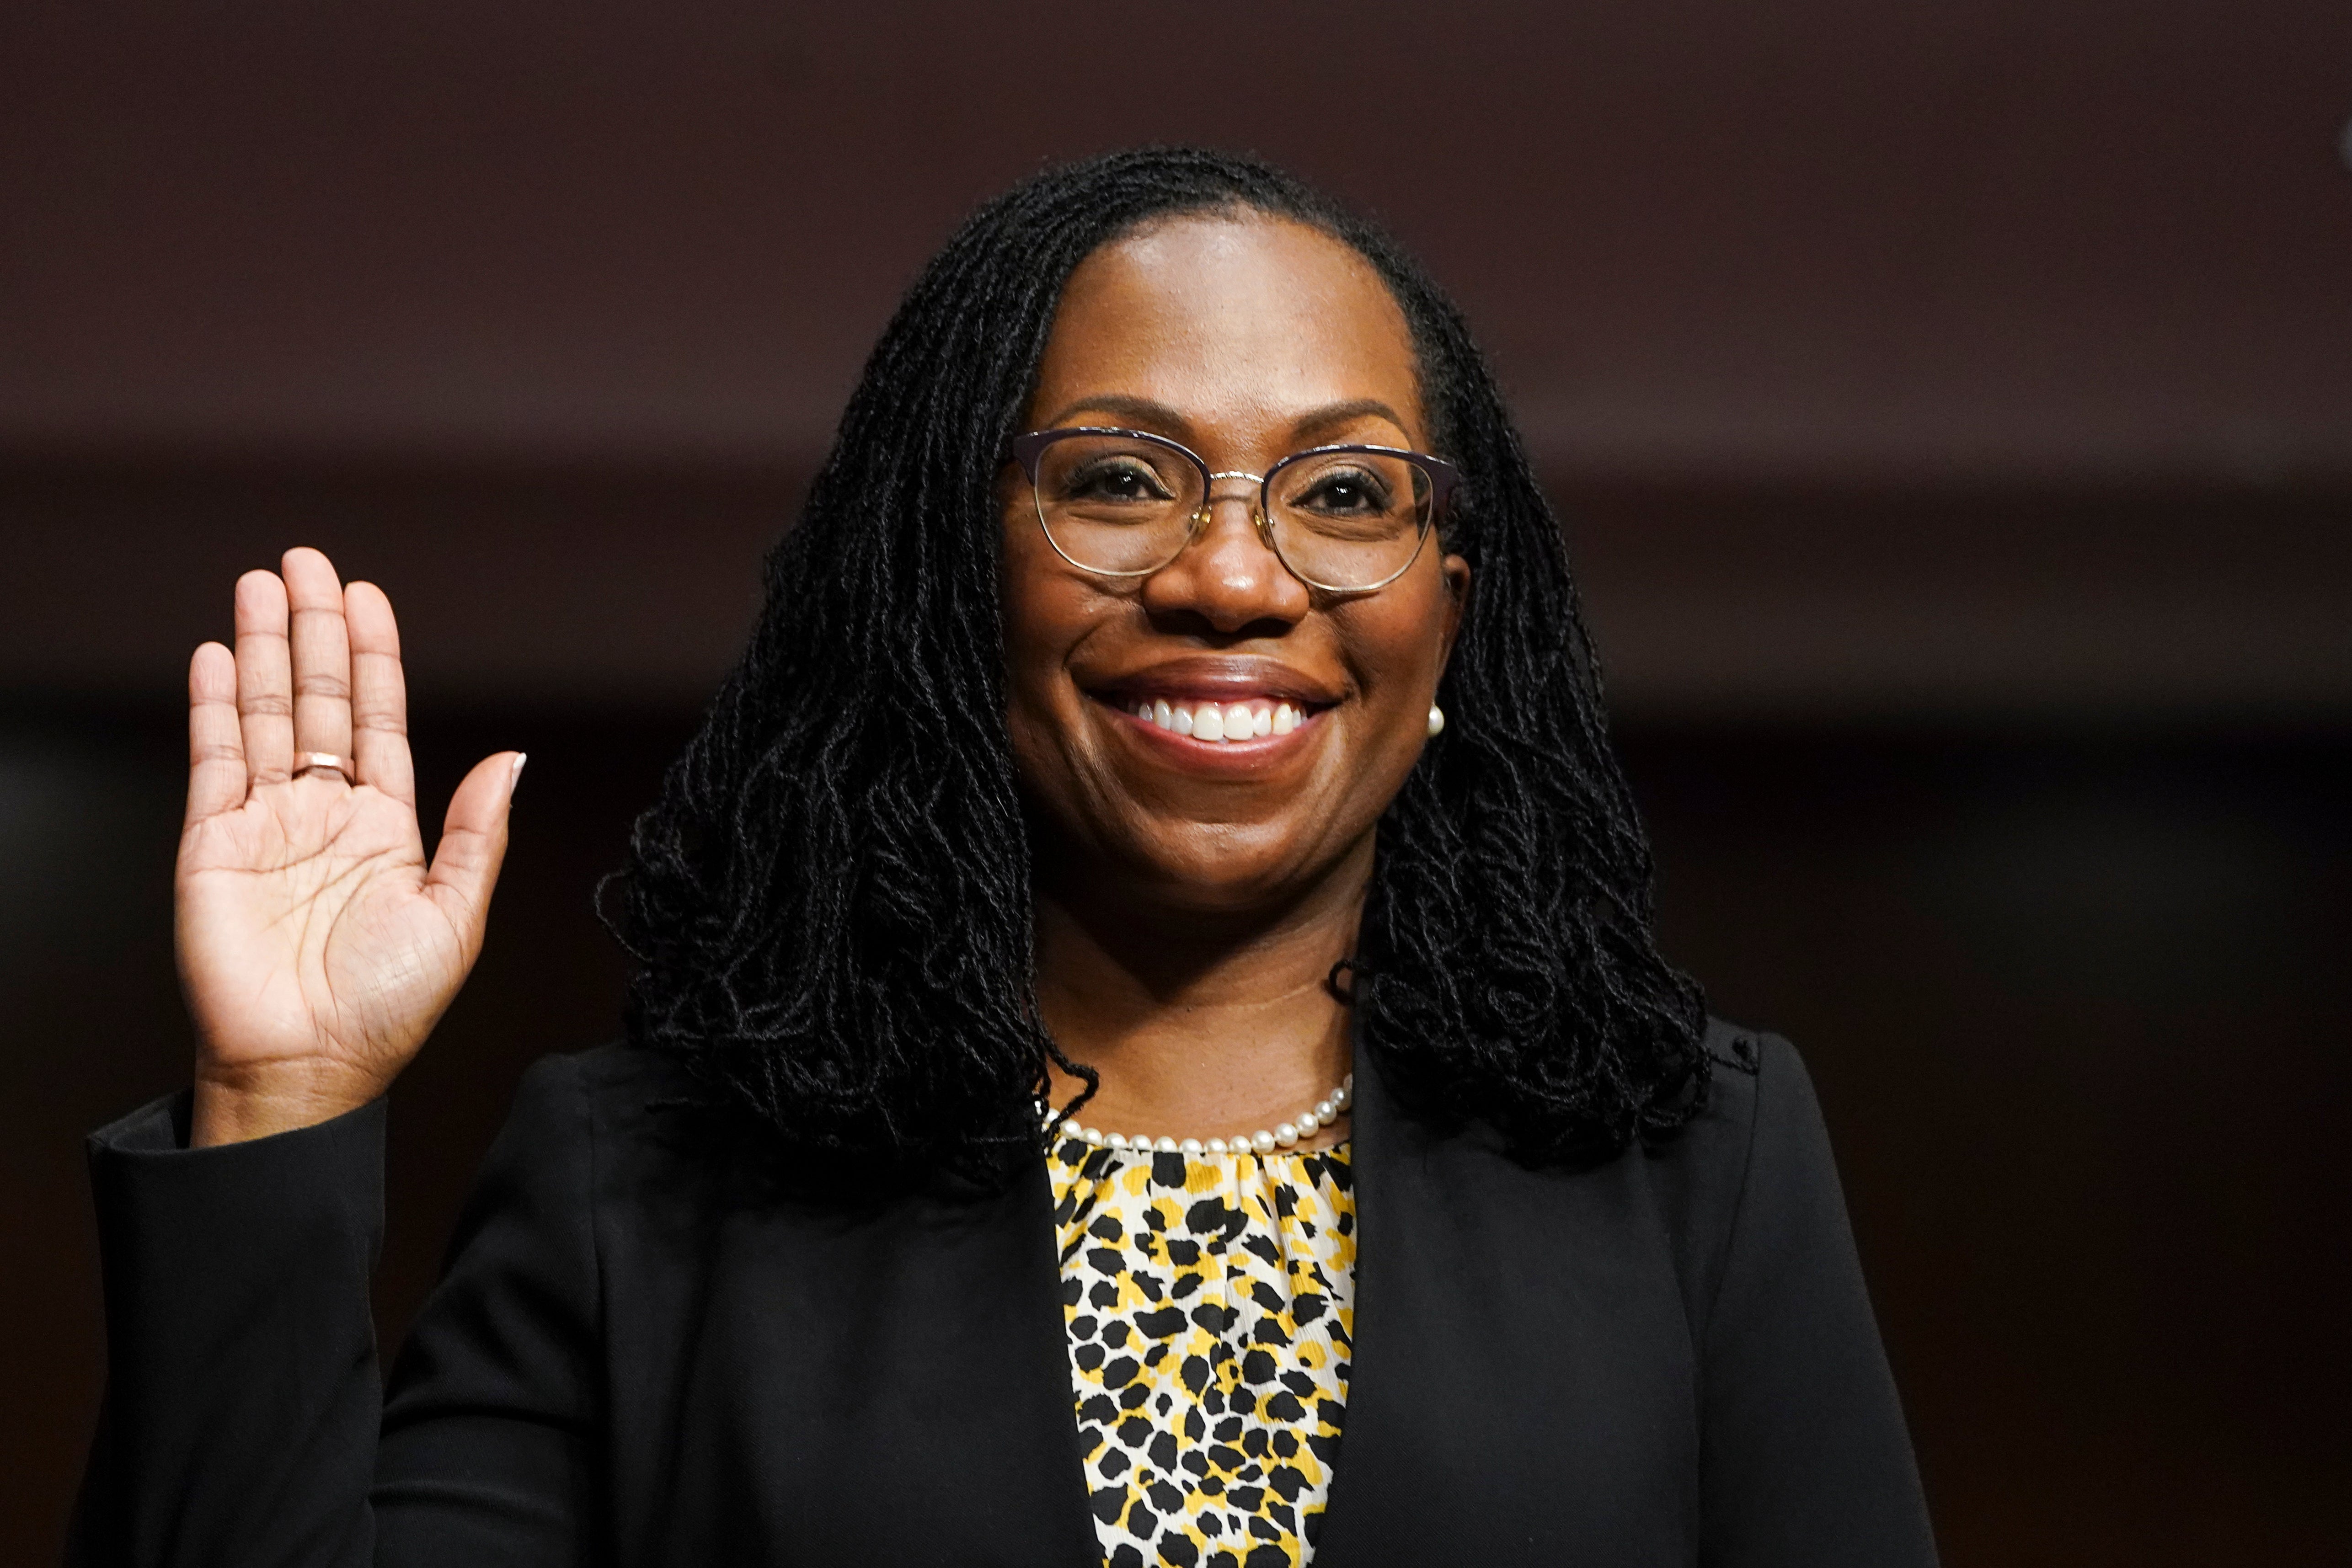 Ketanji Brown Jackson, nominated to be a U.S. Circuit Judge for the District of Columbia Circuit, is sworn in to testify before a Senate Judiciary Committee hearing on pending judicial nominations on Capitol Hill, April 28, 2021 in Washington, DC